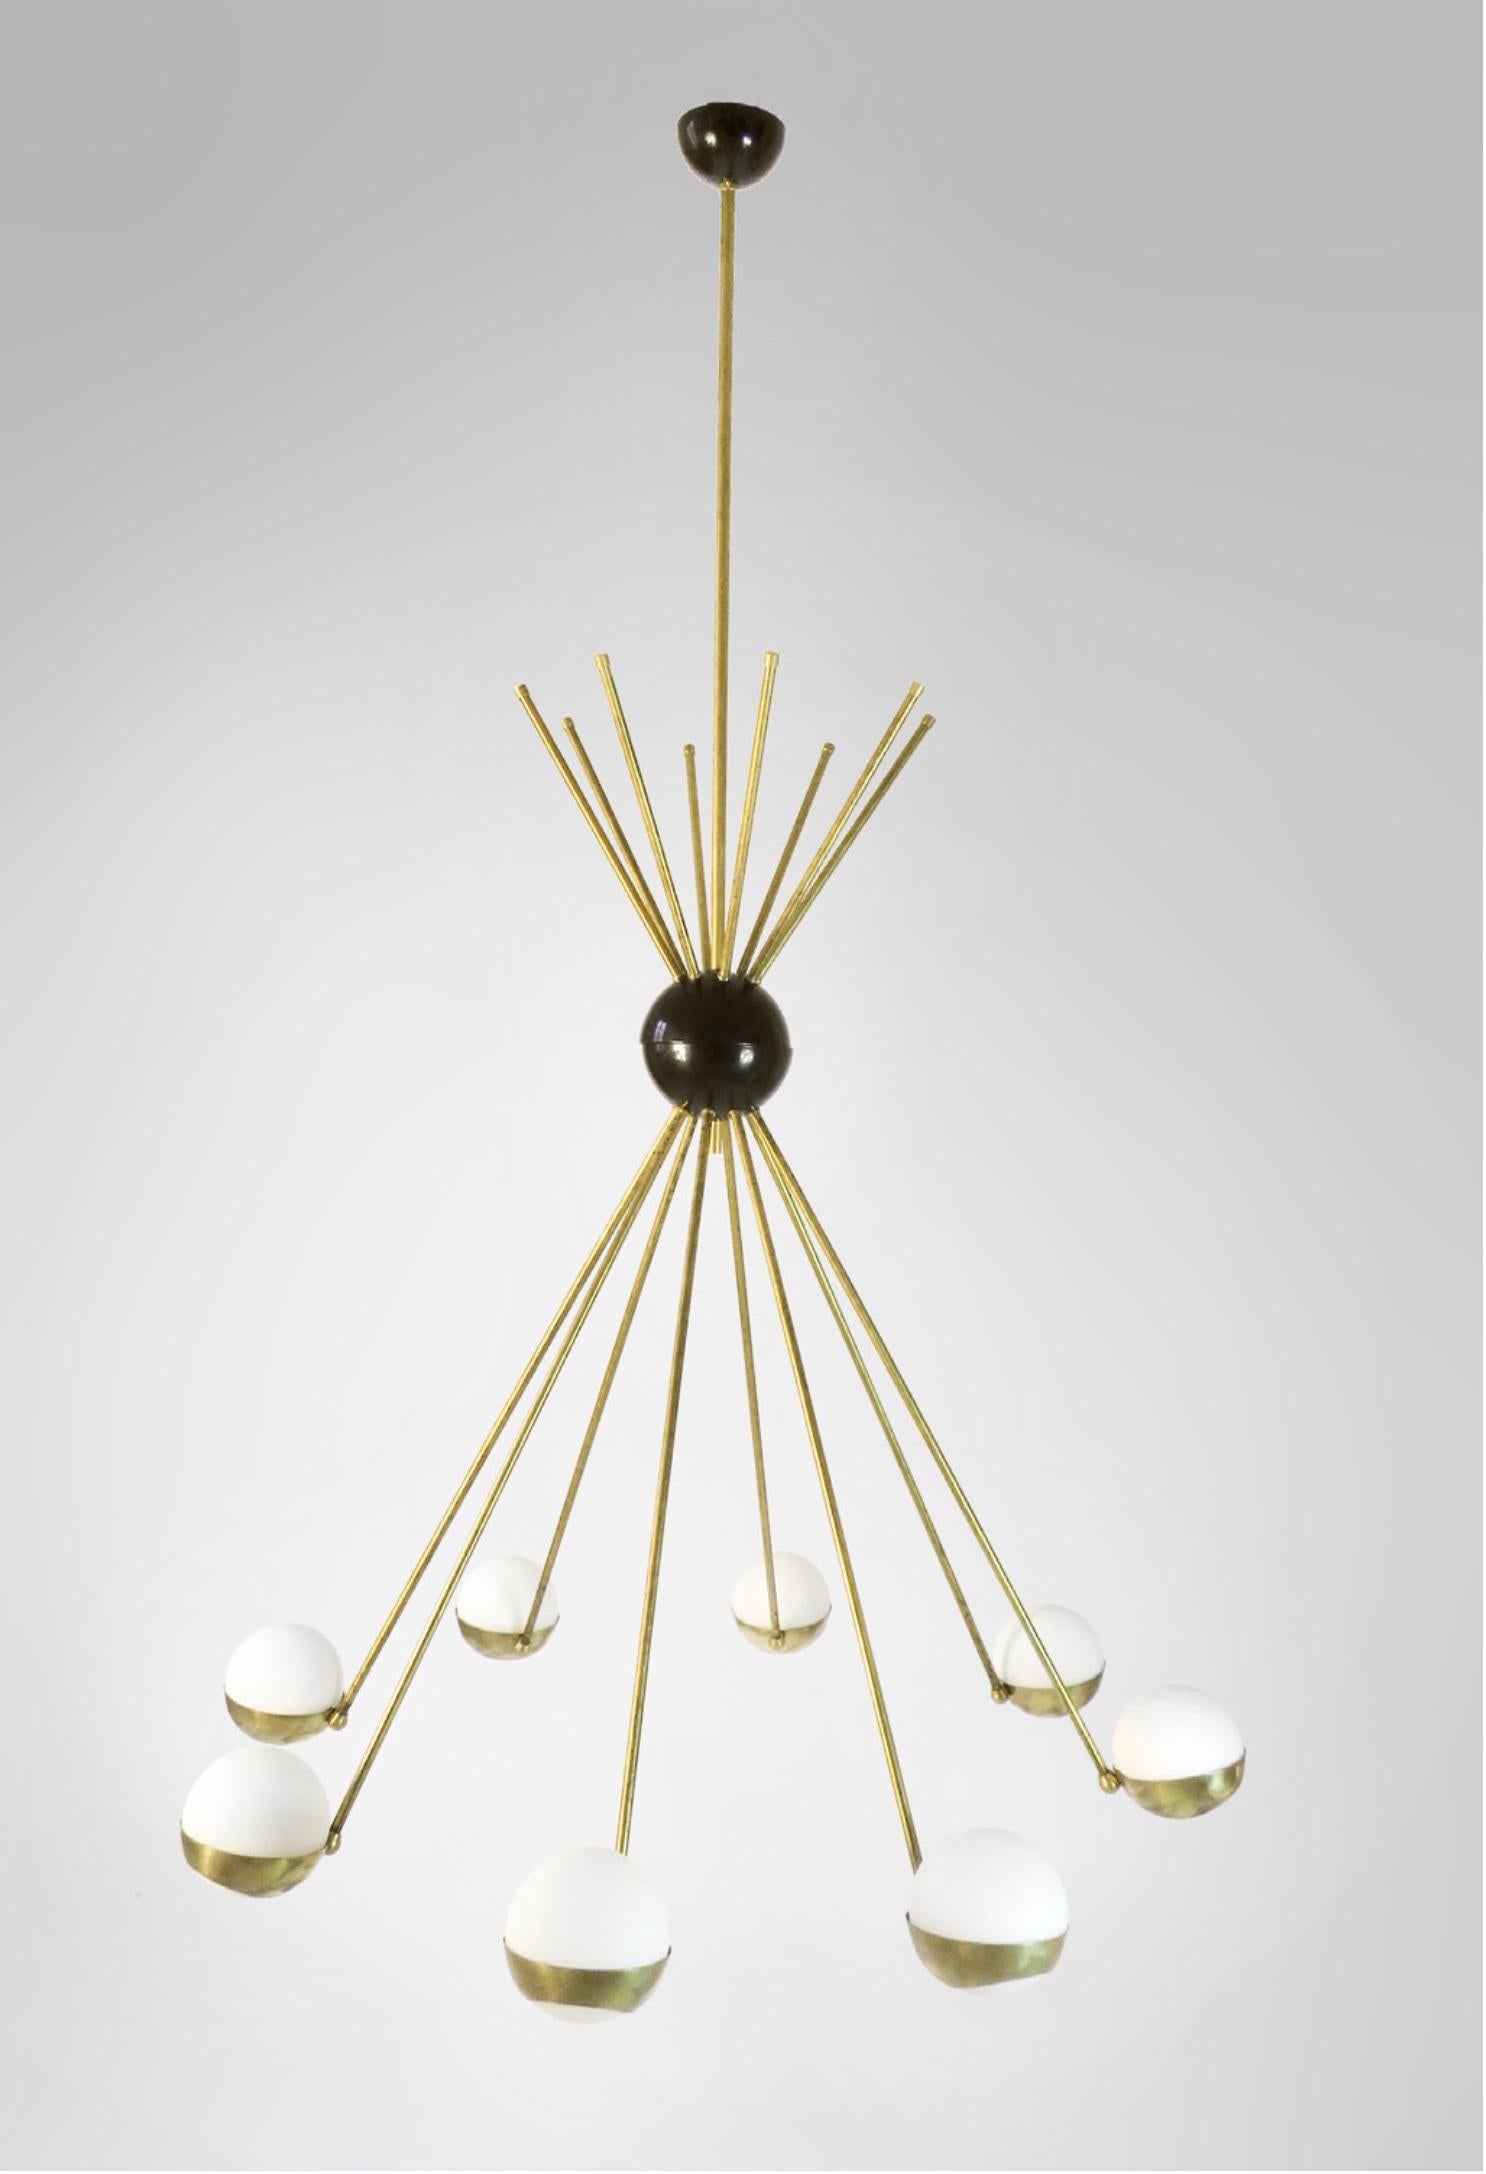 Elegant Italian mid century style eight globes opaline glass and brass chandelier with hand rubbed antique treated brass frame. A statement chandelier which will elevate any room with a sophisticated design. Opaline glass globes, black central ball